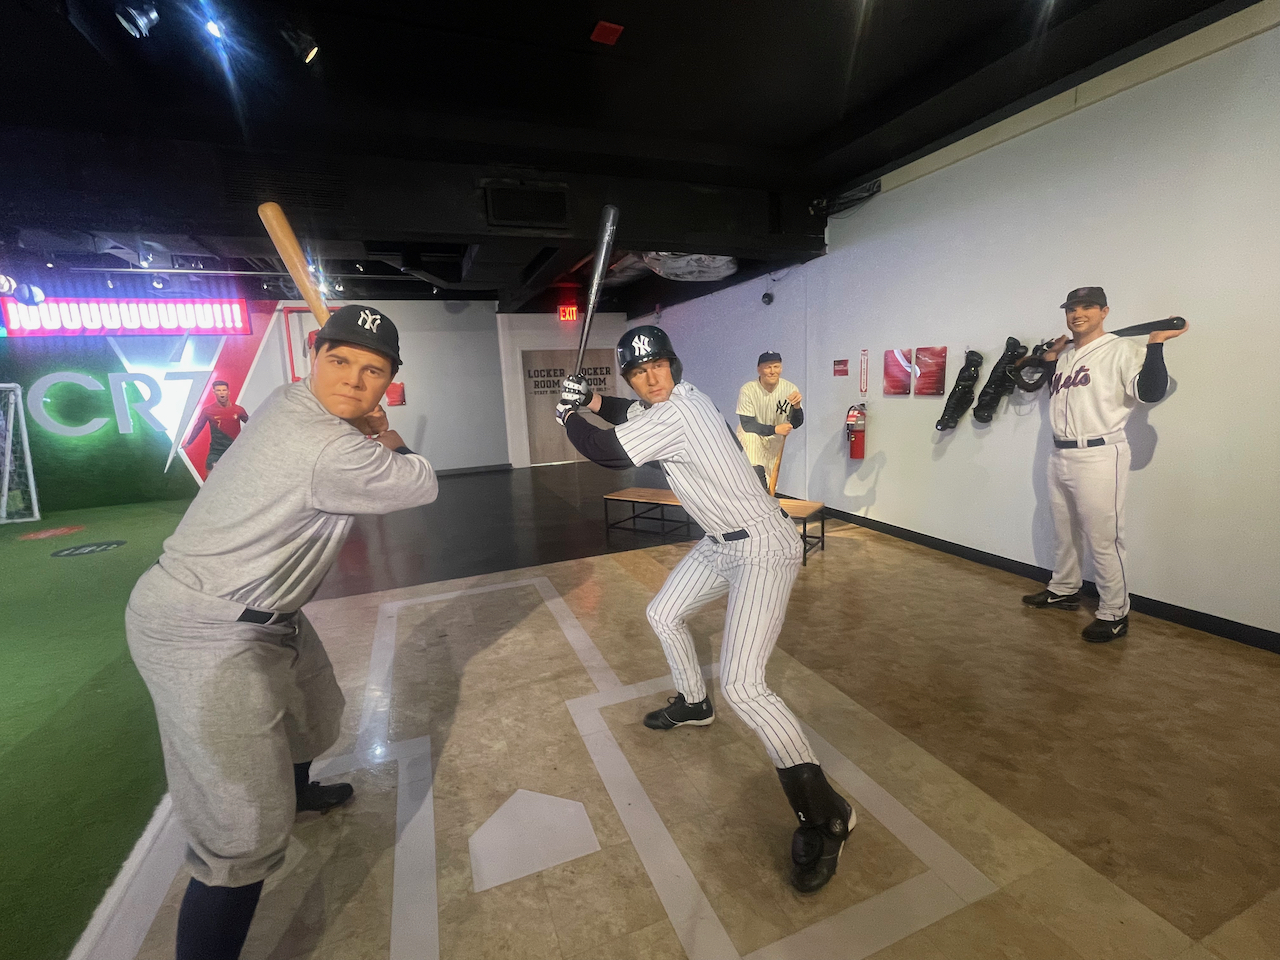 Babe Ruth and MLB legends Madame Tussauds wax figures at Madame Tussauds New York